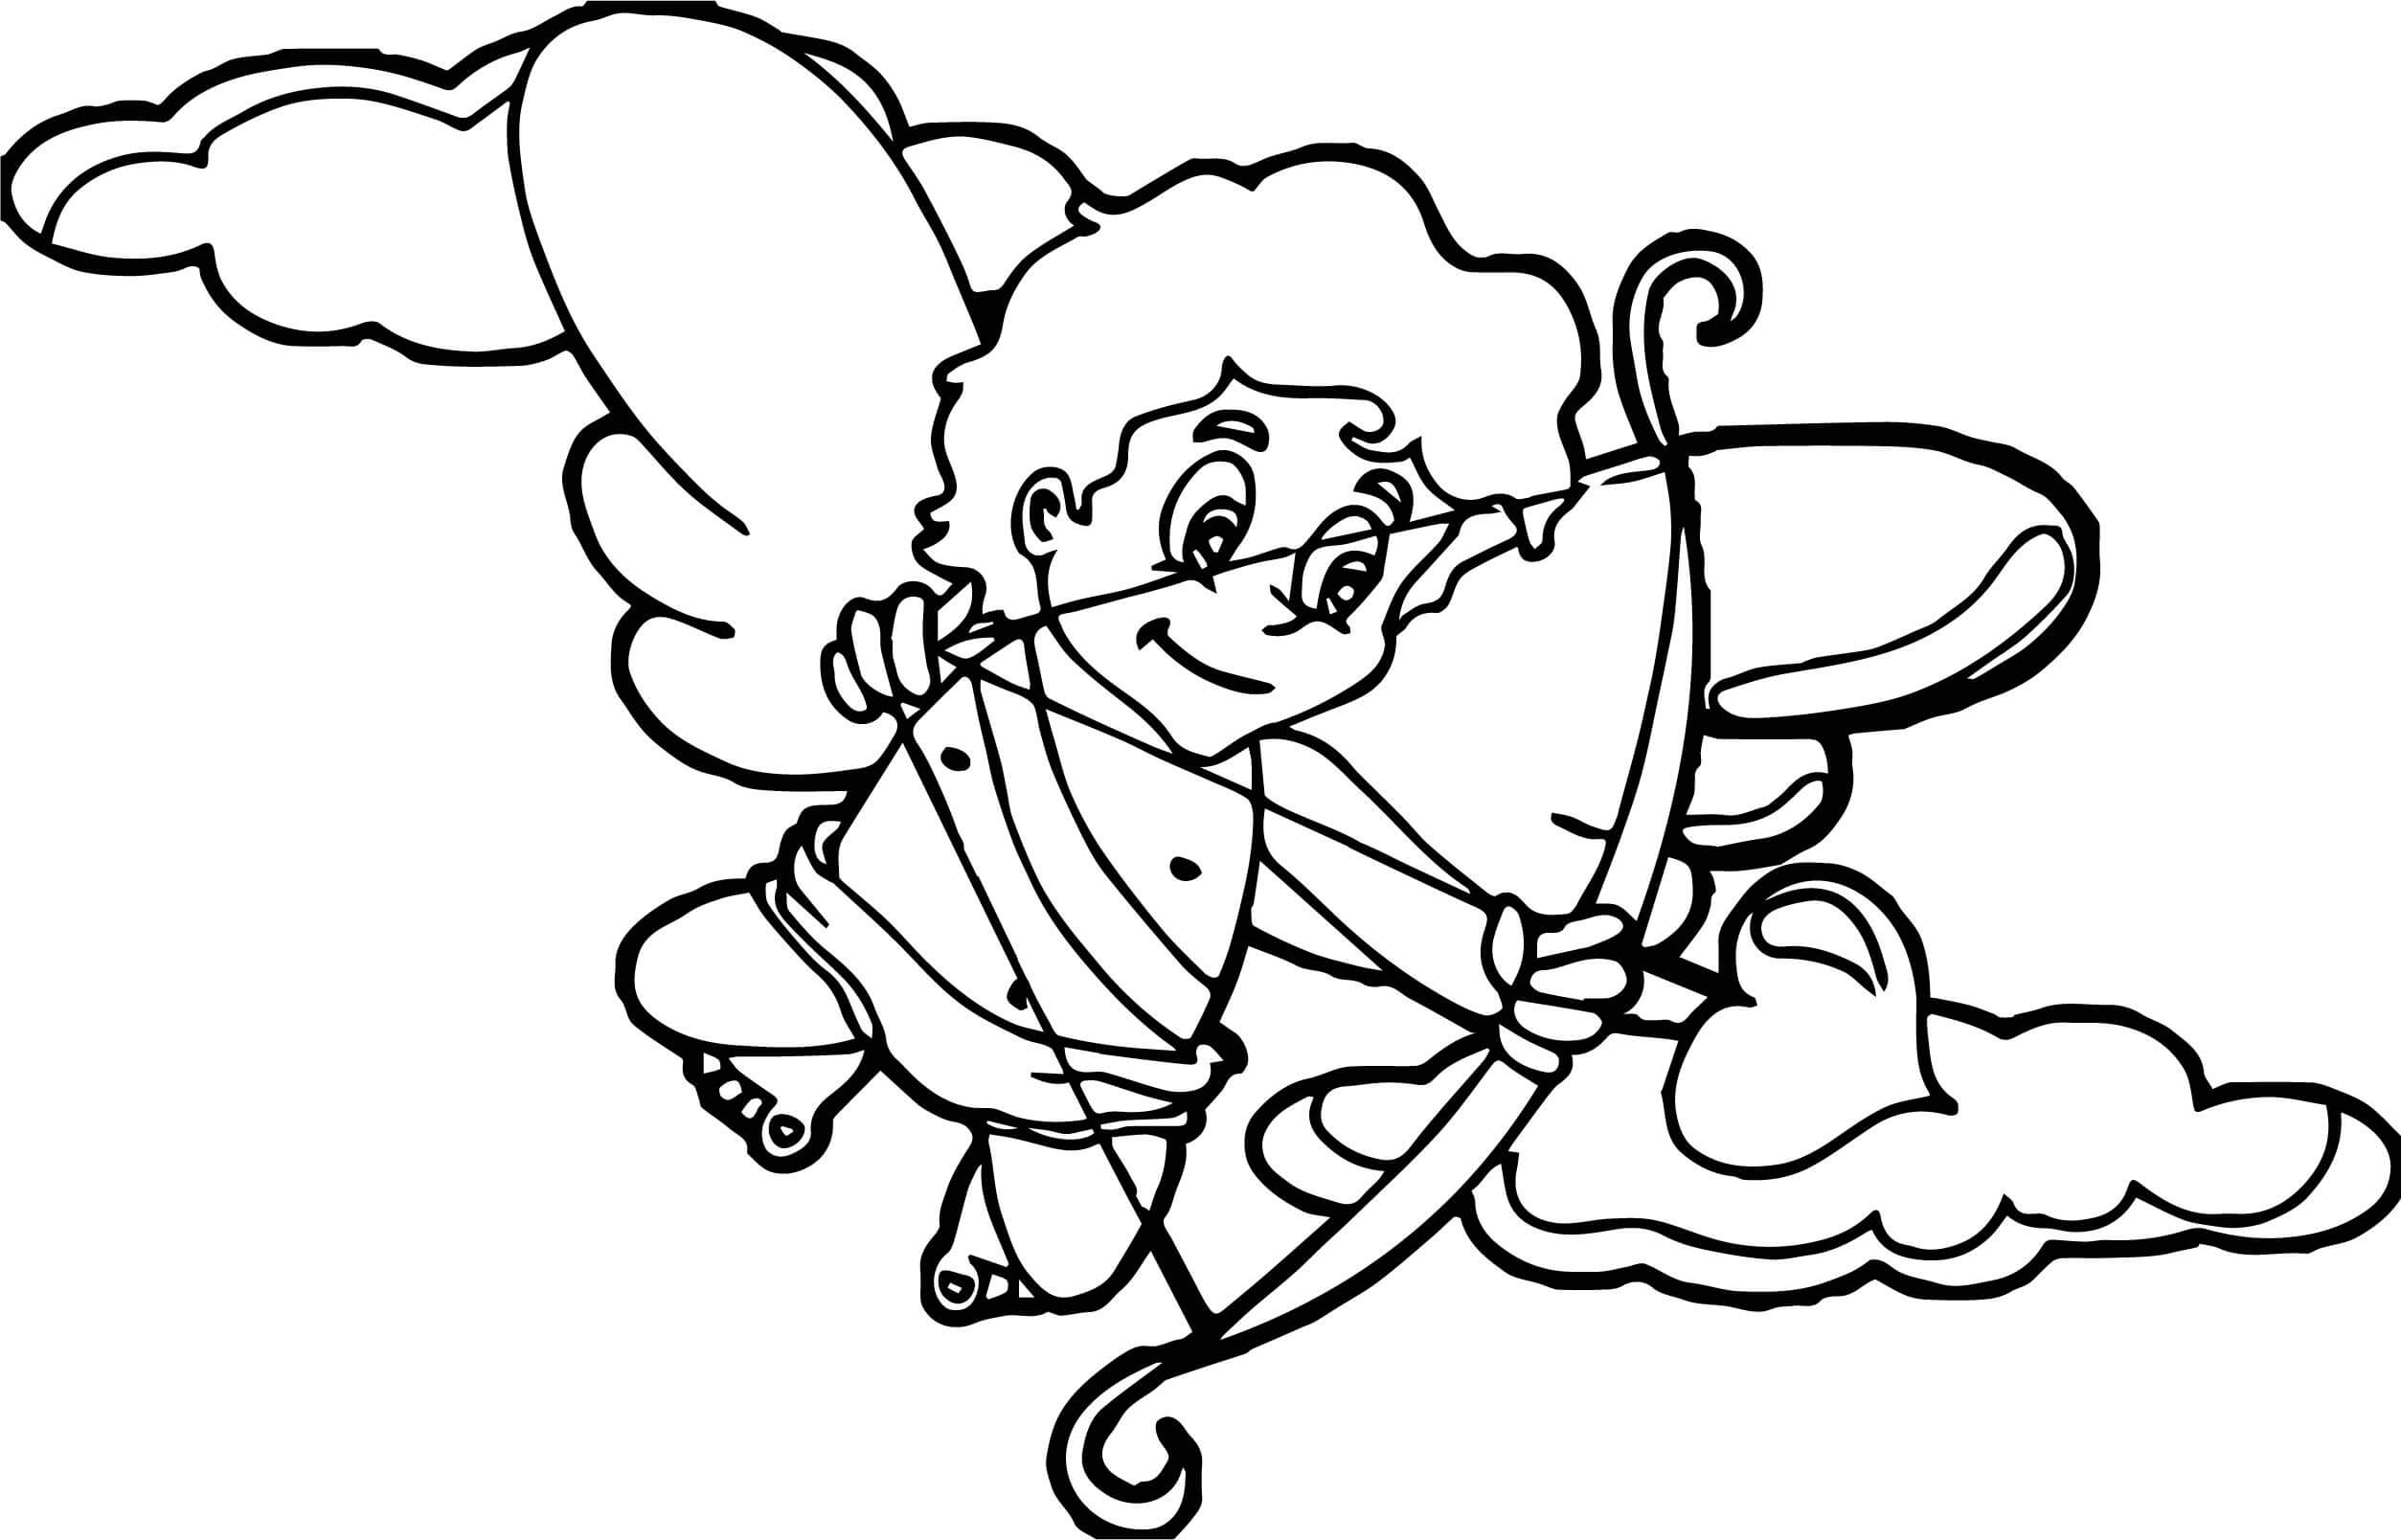 Cupid In The Clouds Coloring Page